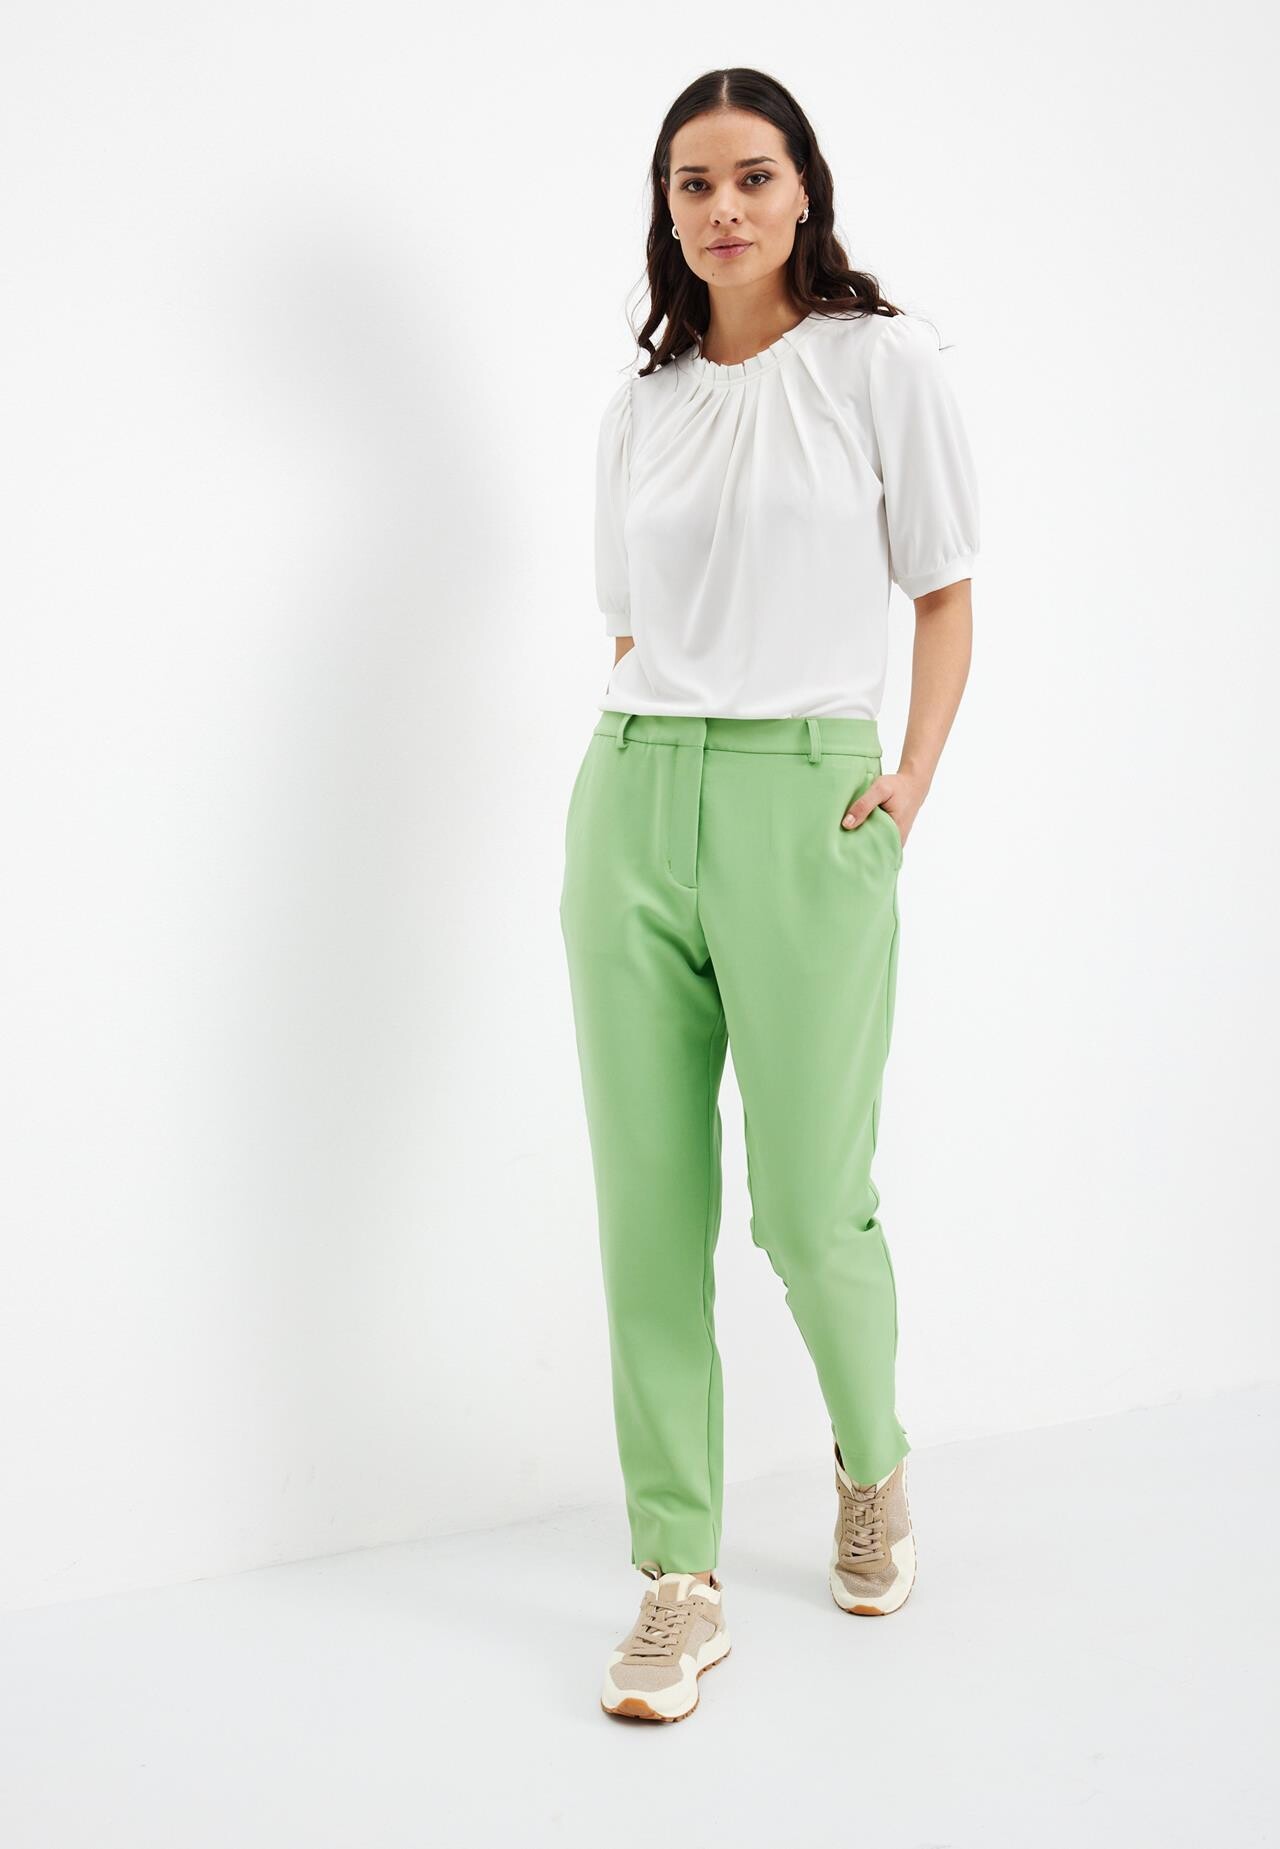 Embellished mesh trousers - Lime green - Ladies | H&M IN